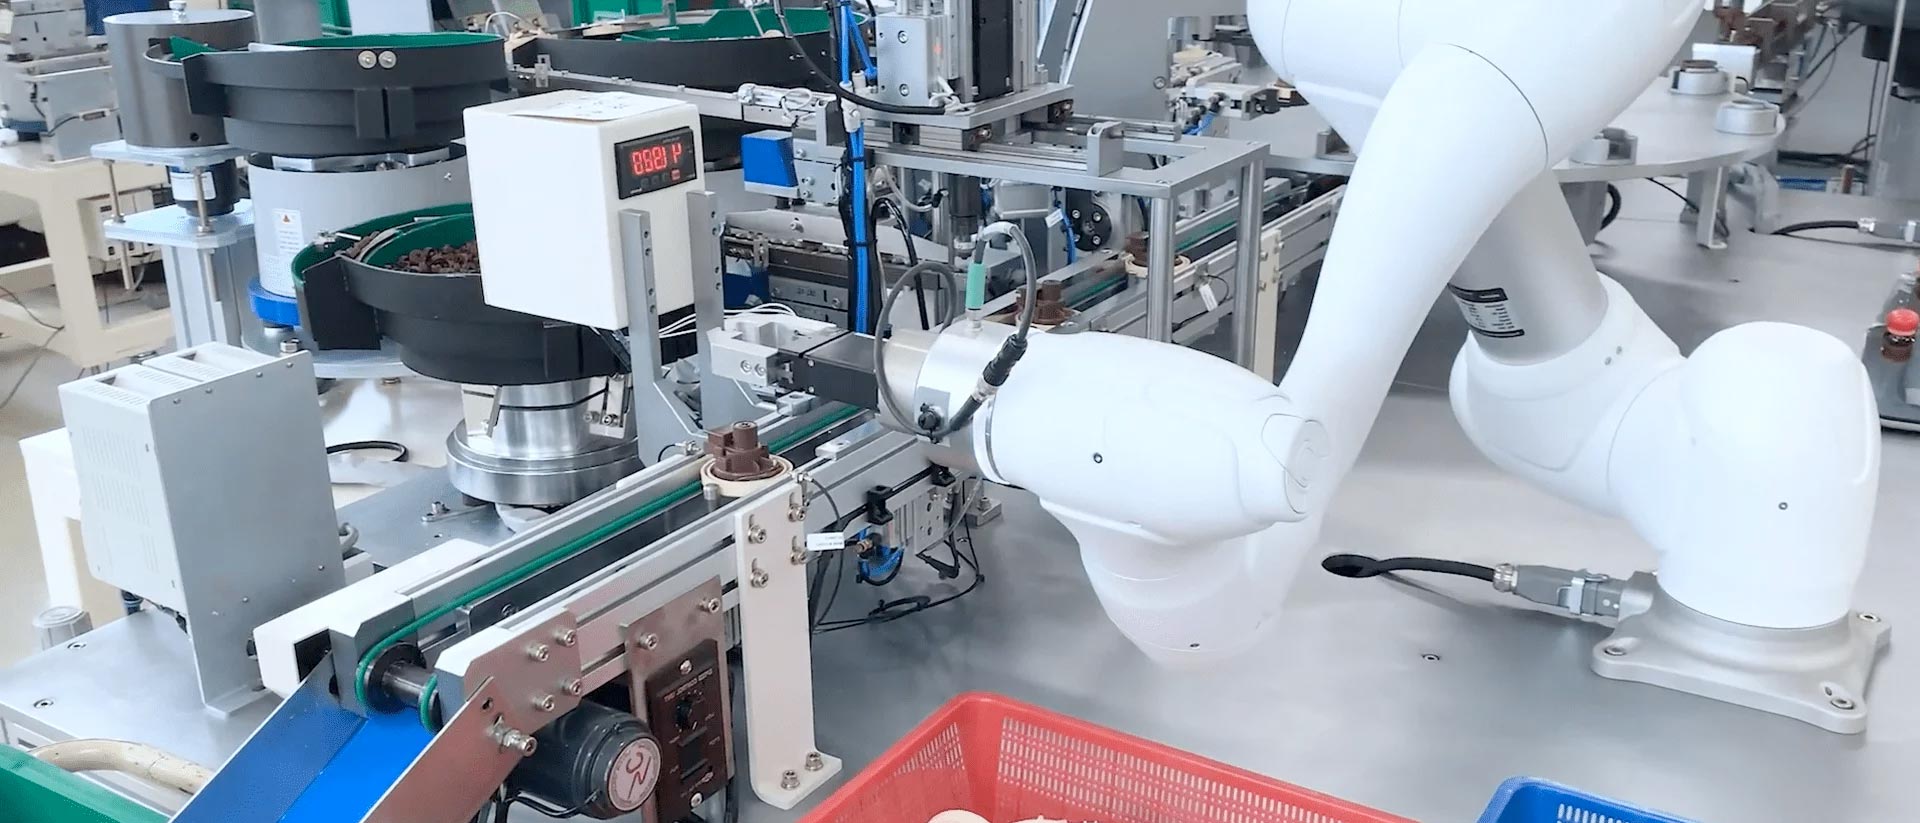 Cobot on a production line